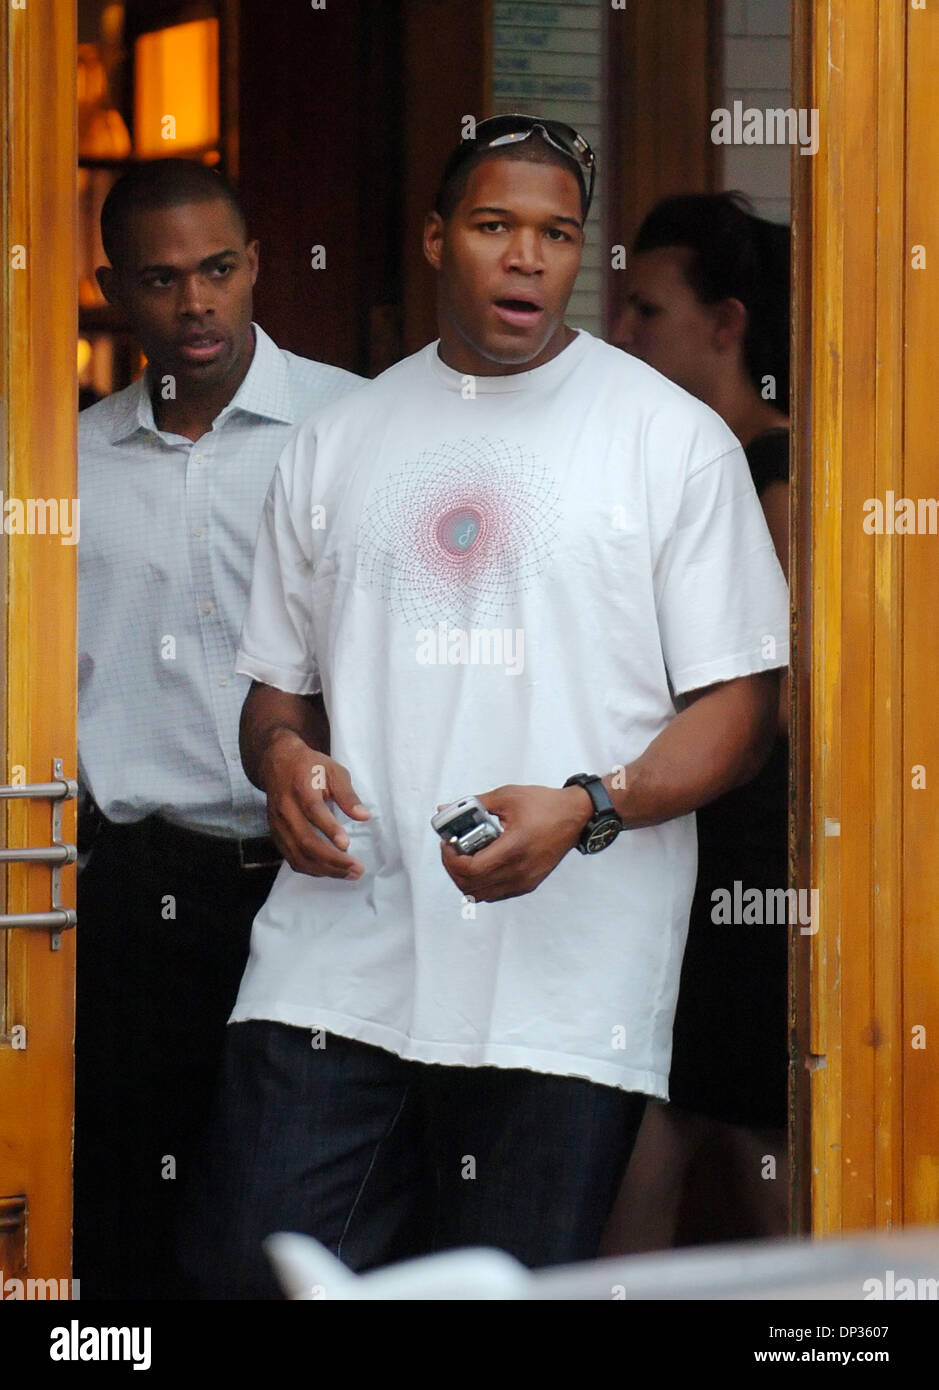 Jun 21, 2006; Manhattan, New York, USA; NY Giants player MICHAEL STRAHAN (R) with friend, TV and print personality Dr. IAN SMITH (L) exits the restaurant Pastis, in the meatpacking district. Michael Strahan and his wife Jean Strahan are going through a bitter divorce over $22 million in assets in N.J. divorce court. Earlier this week Jean Strahan claimed that her husband Michael St Stock Photo